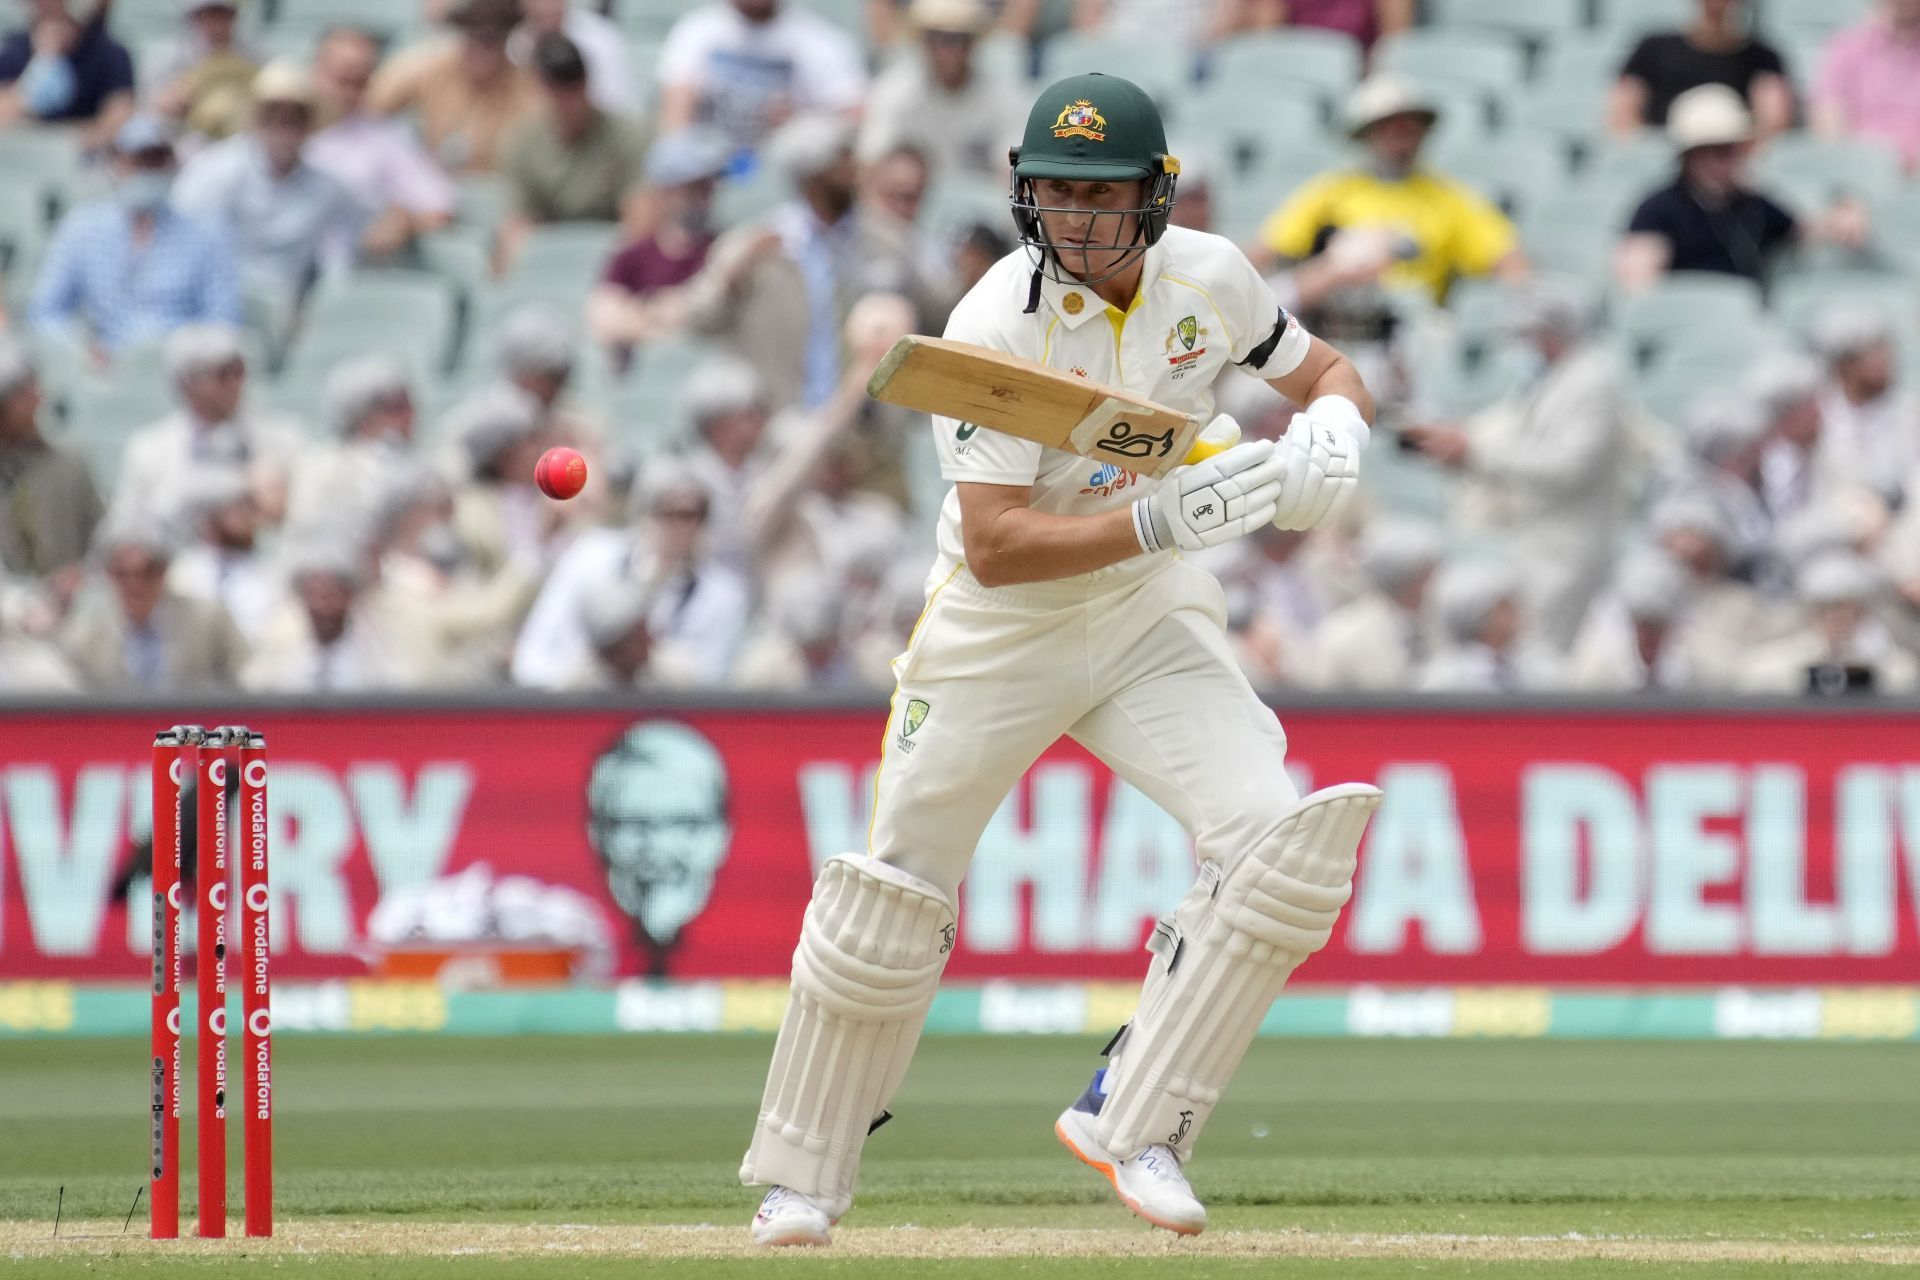 Marnus Labuschagne scored a defiant 103 off 305 balls for Australia in the 1st innings of the 2nd Ashes Test.